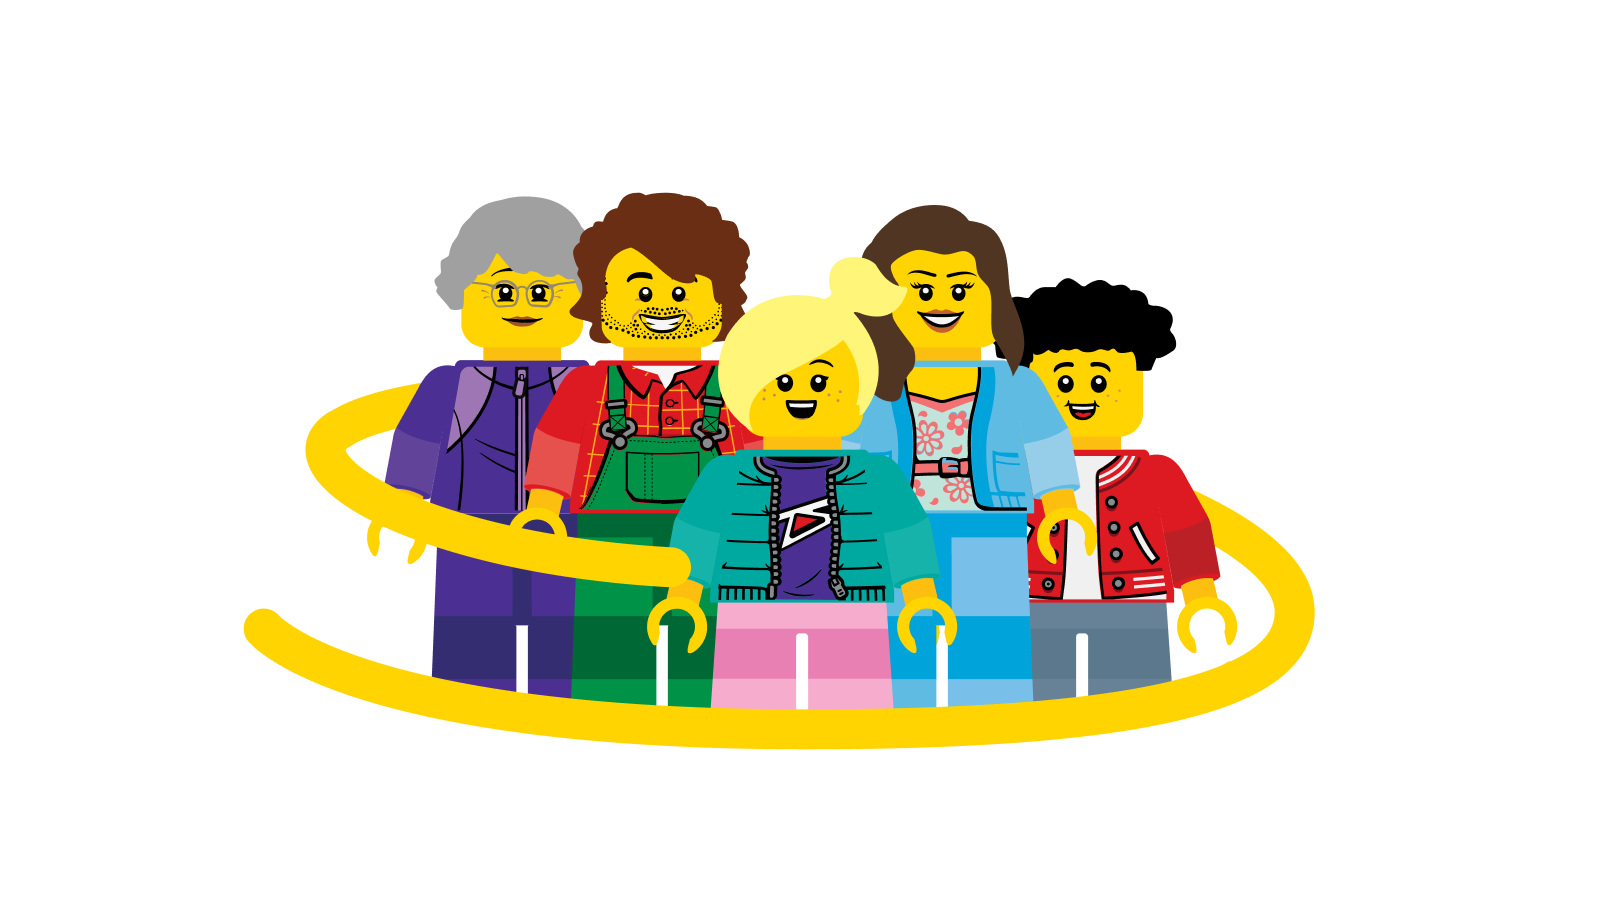 A family of LEGO minifigures